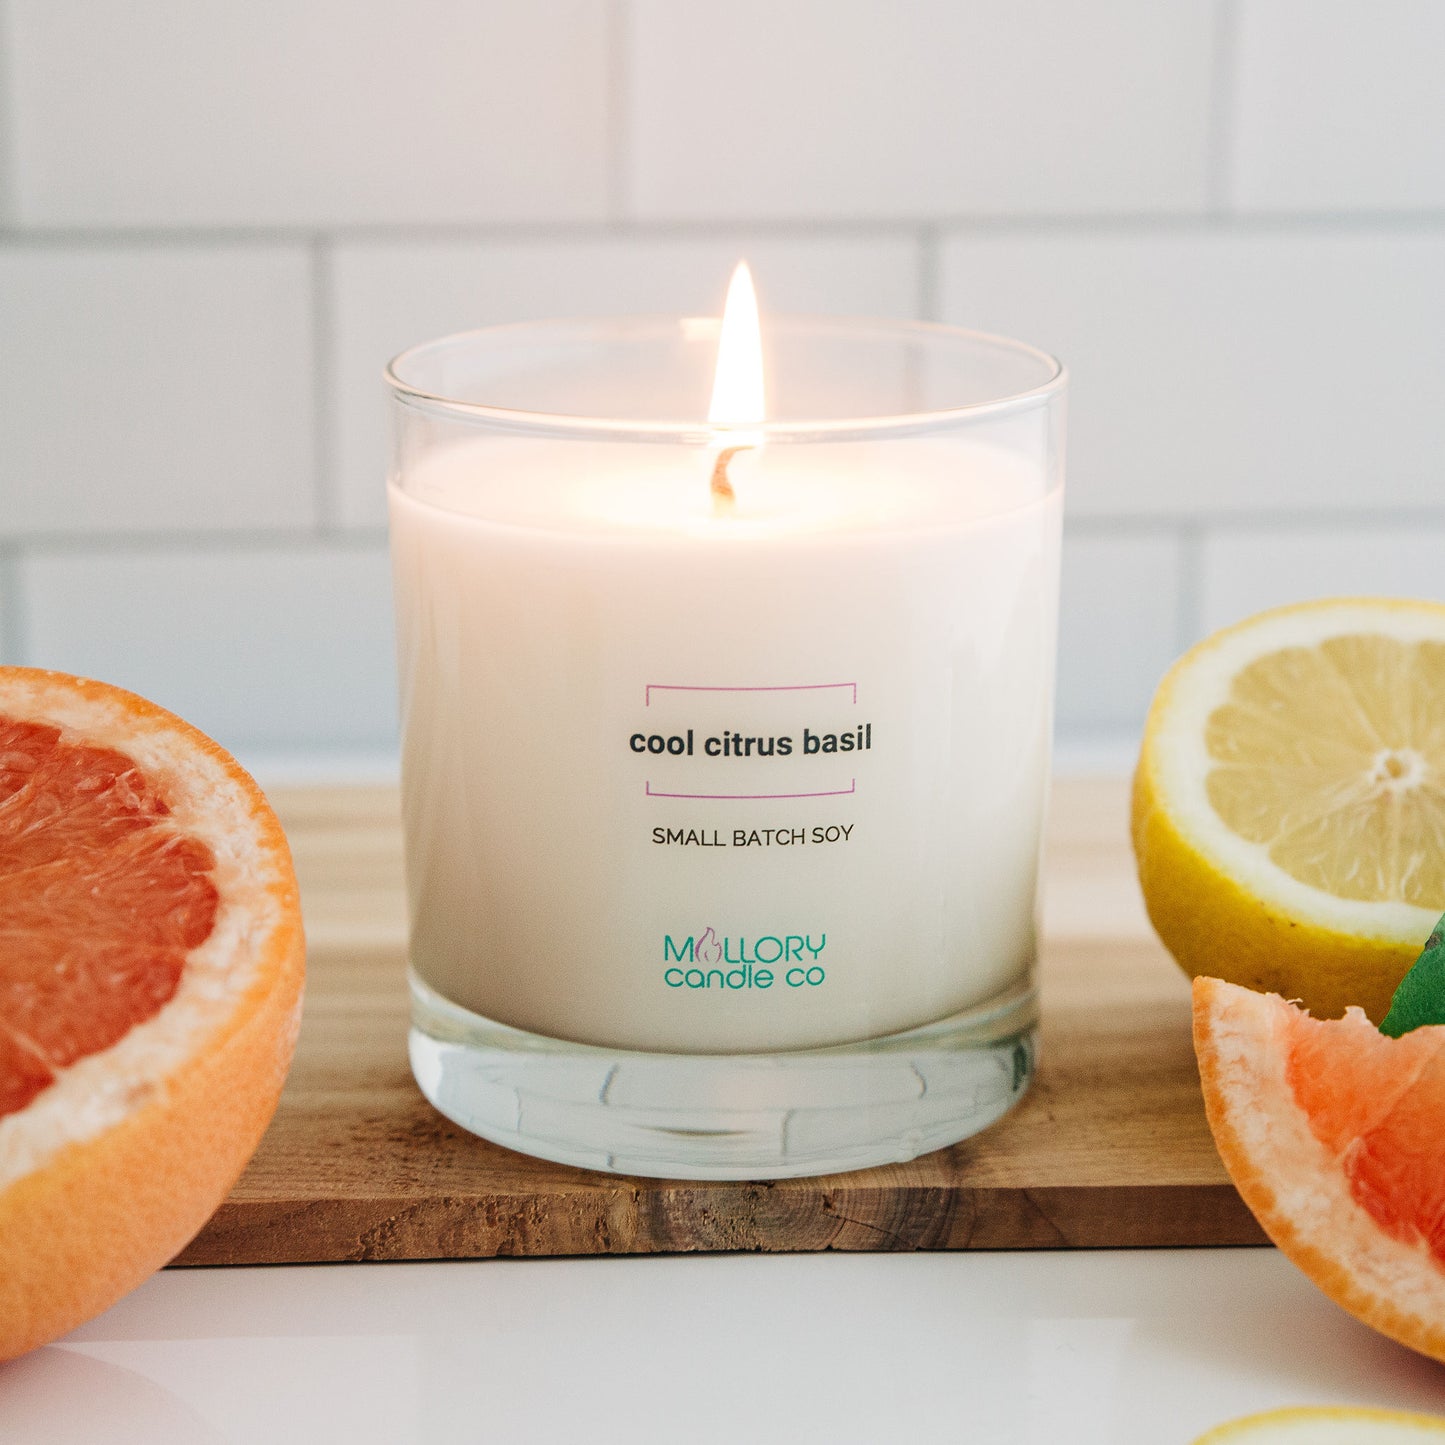 Cool Citrus Basil Candle | Small Batch Soy | Mallory Candle Co